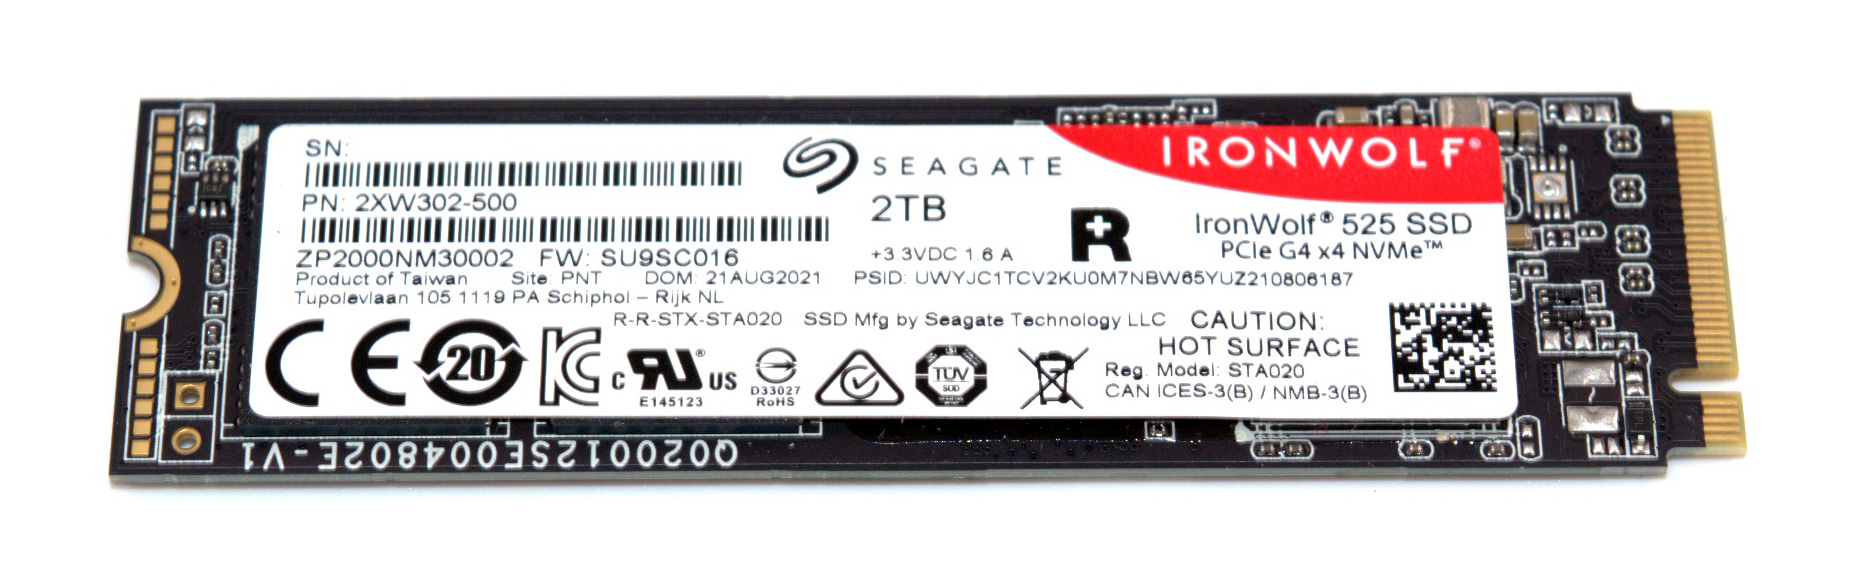 Seagate Introduces IronWolf 525 PCIe 4.0 M.2 NVMe SSDs for NAS Systems